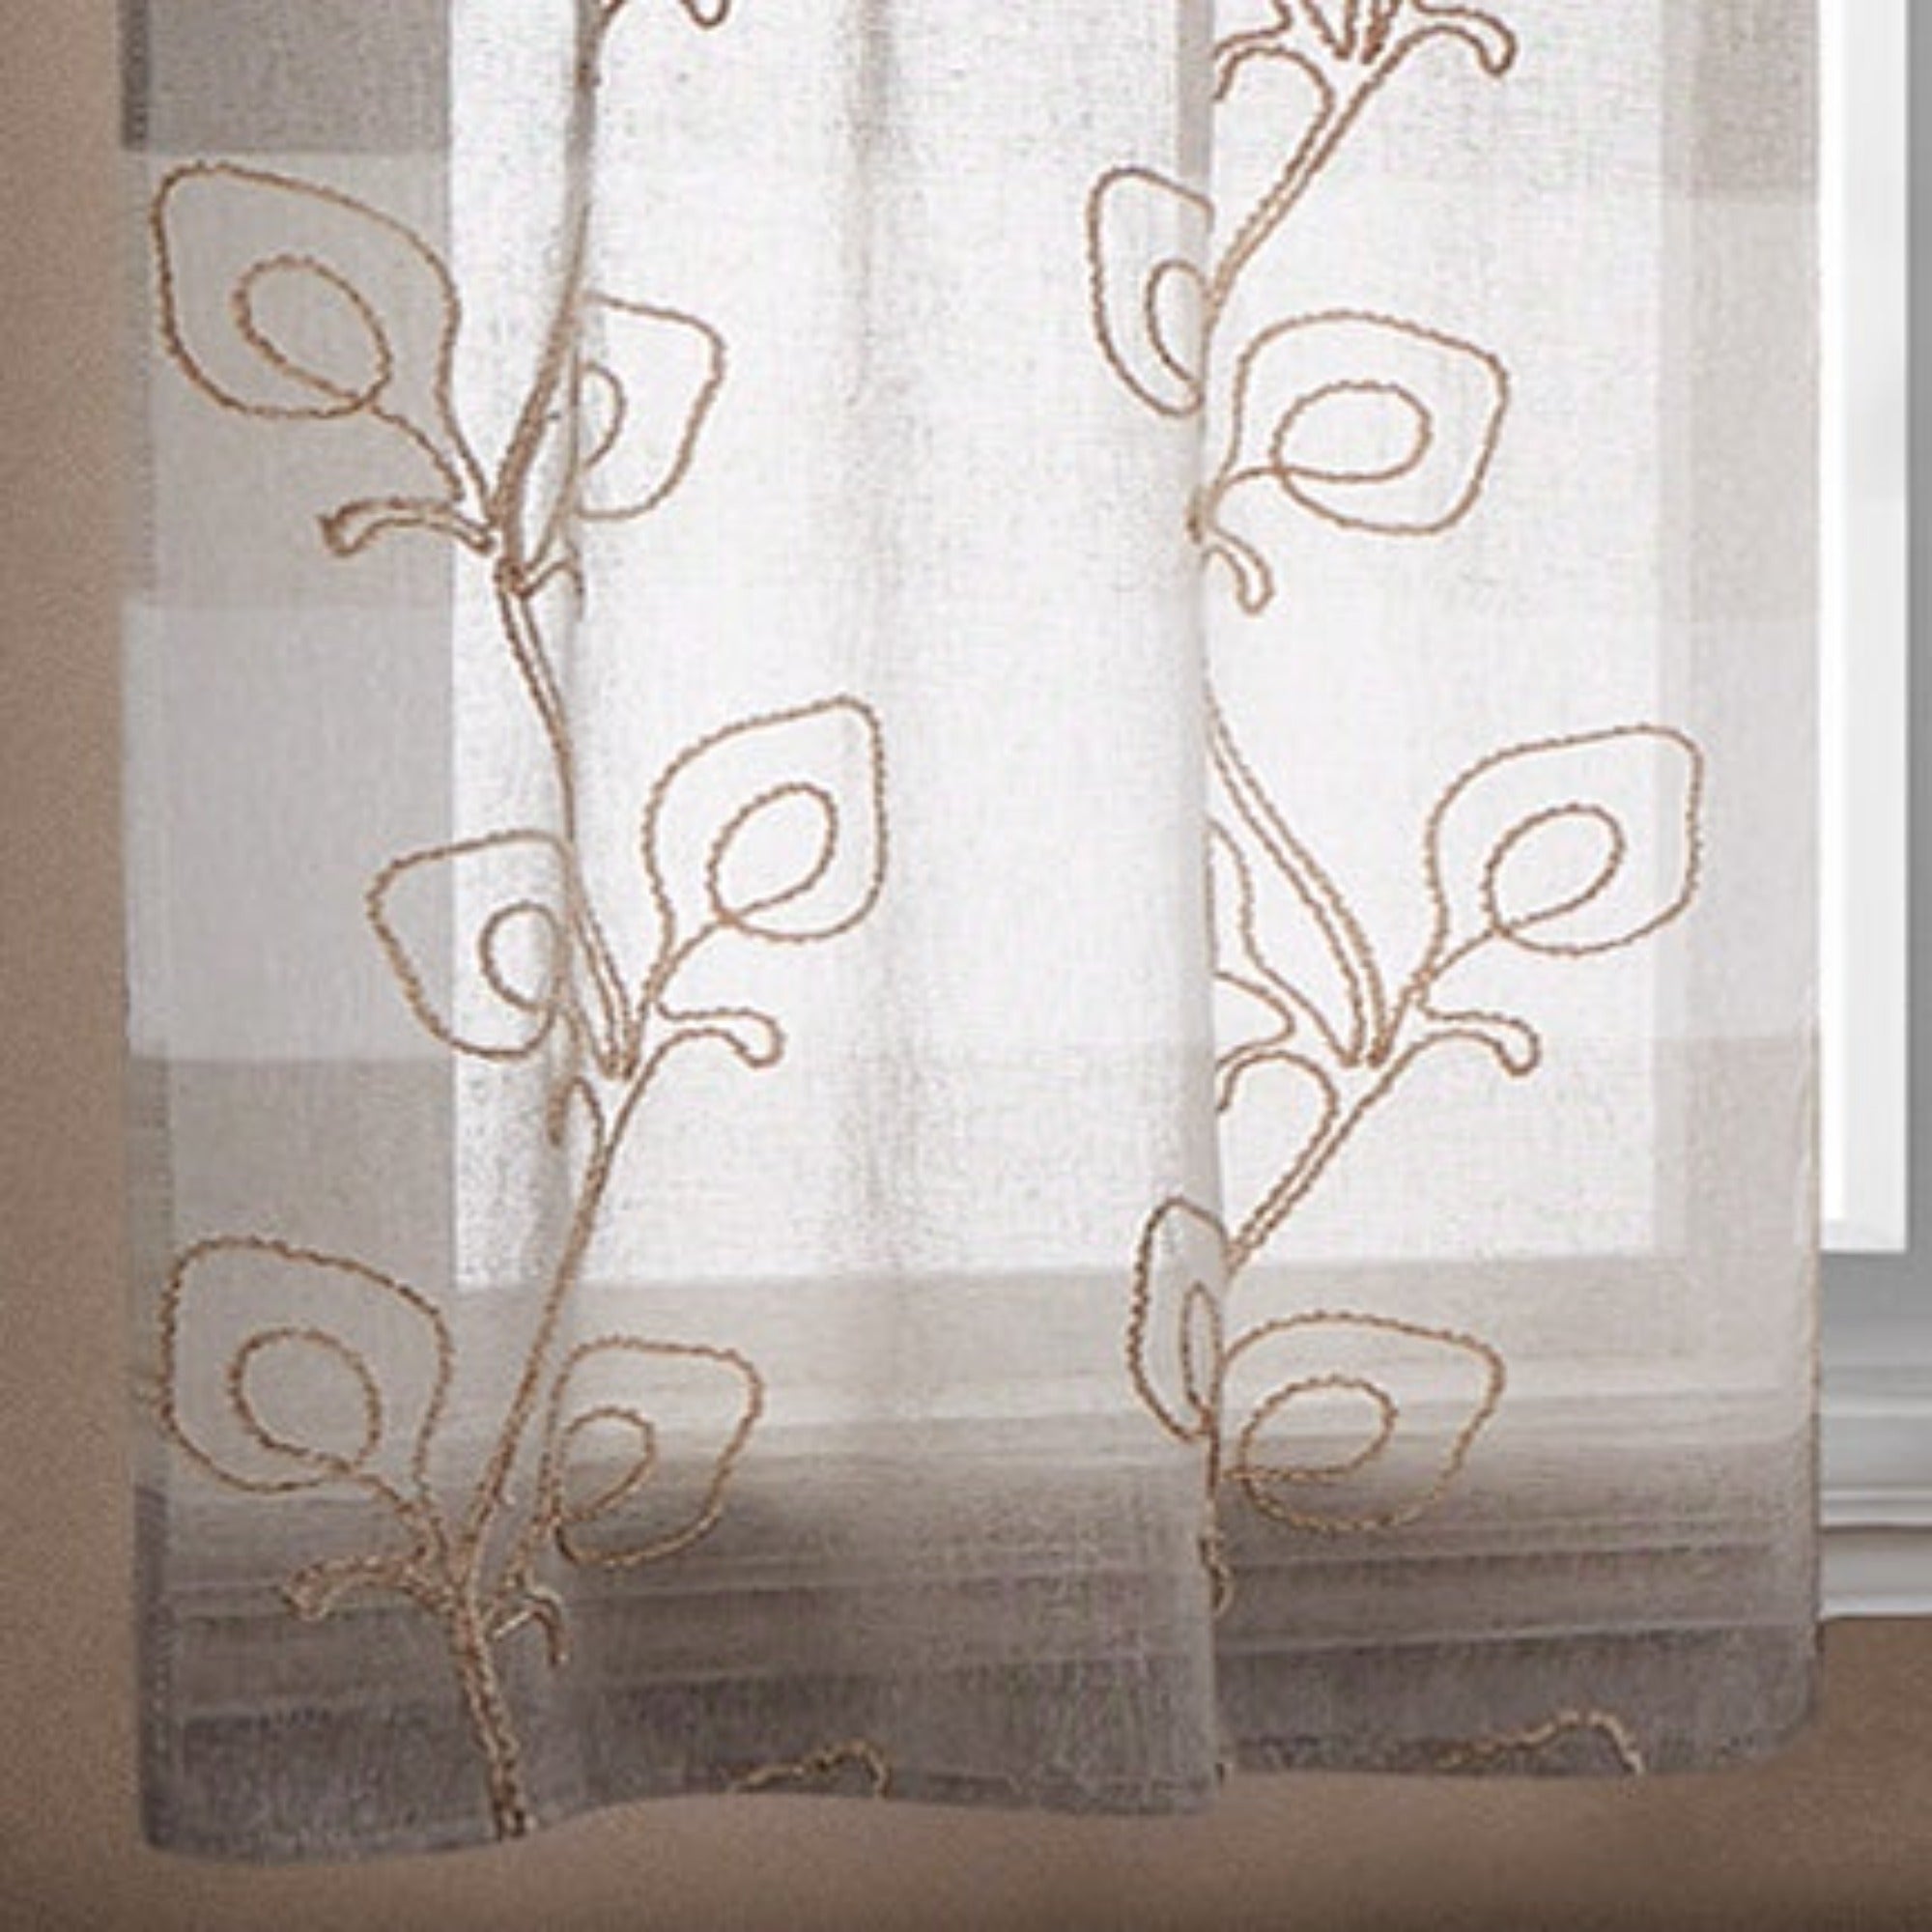 Dainty Home Silvia Boho Linen Look Striped Ombre Fabric With 3D Floral Chenille Embroidery Kitchen Curtain Set, 1 Valance 52 x 18 and 2 Tiers 26 x 36